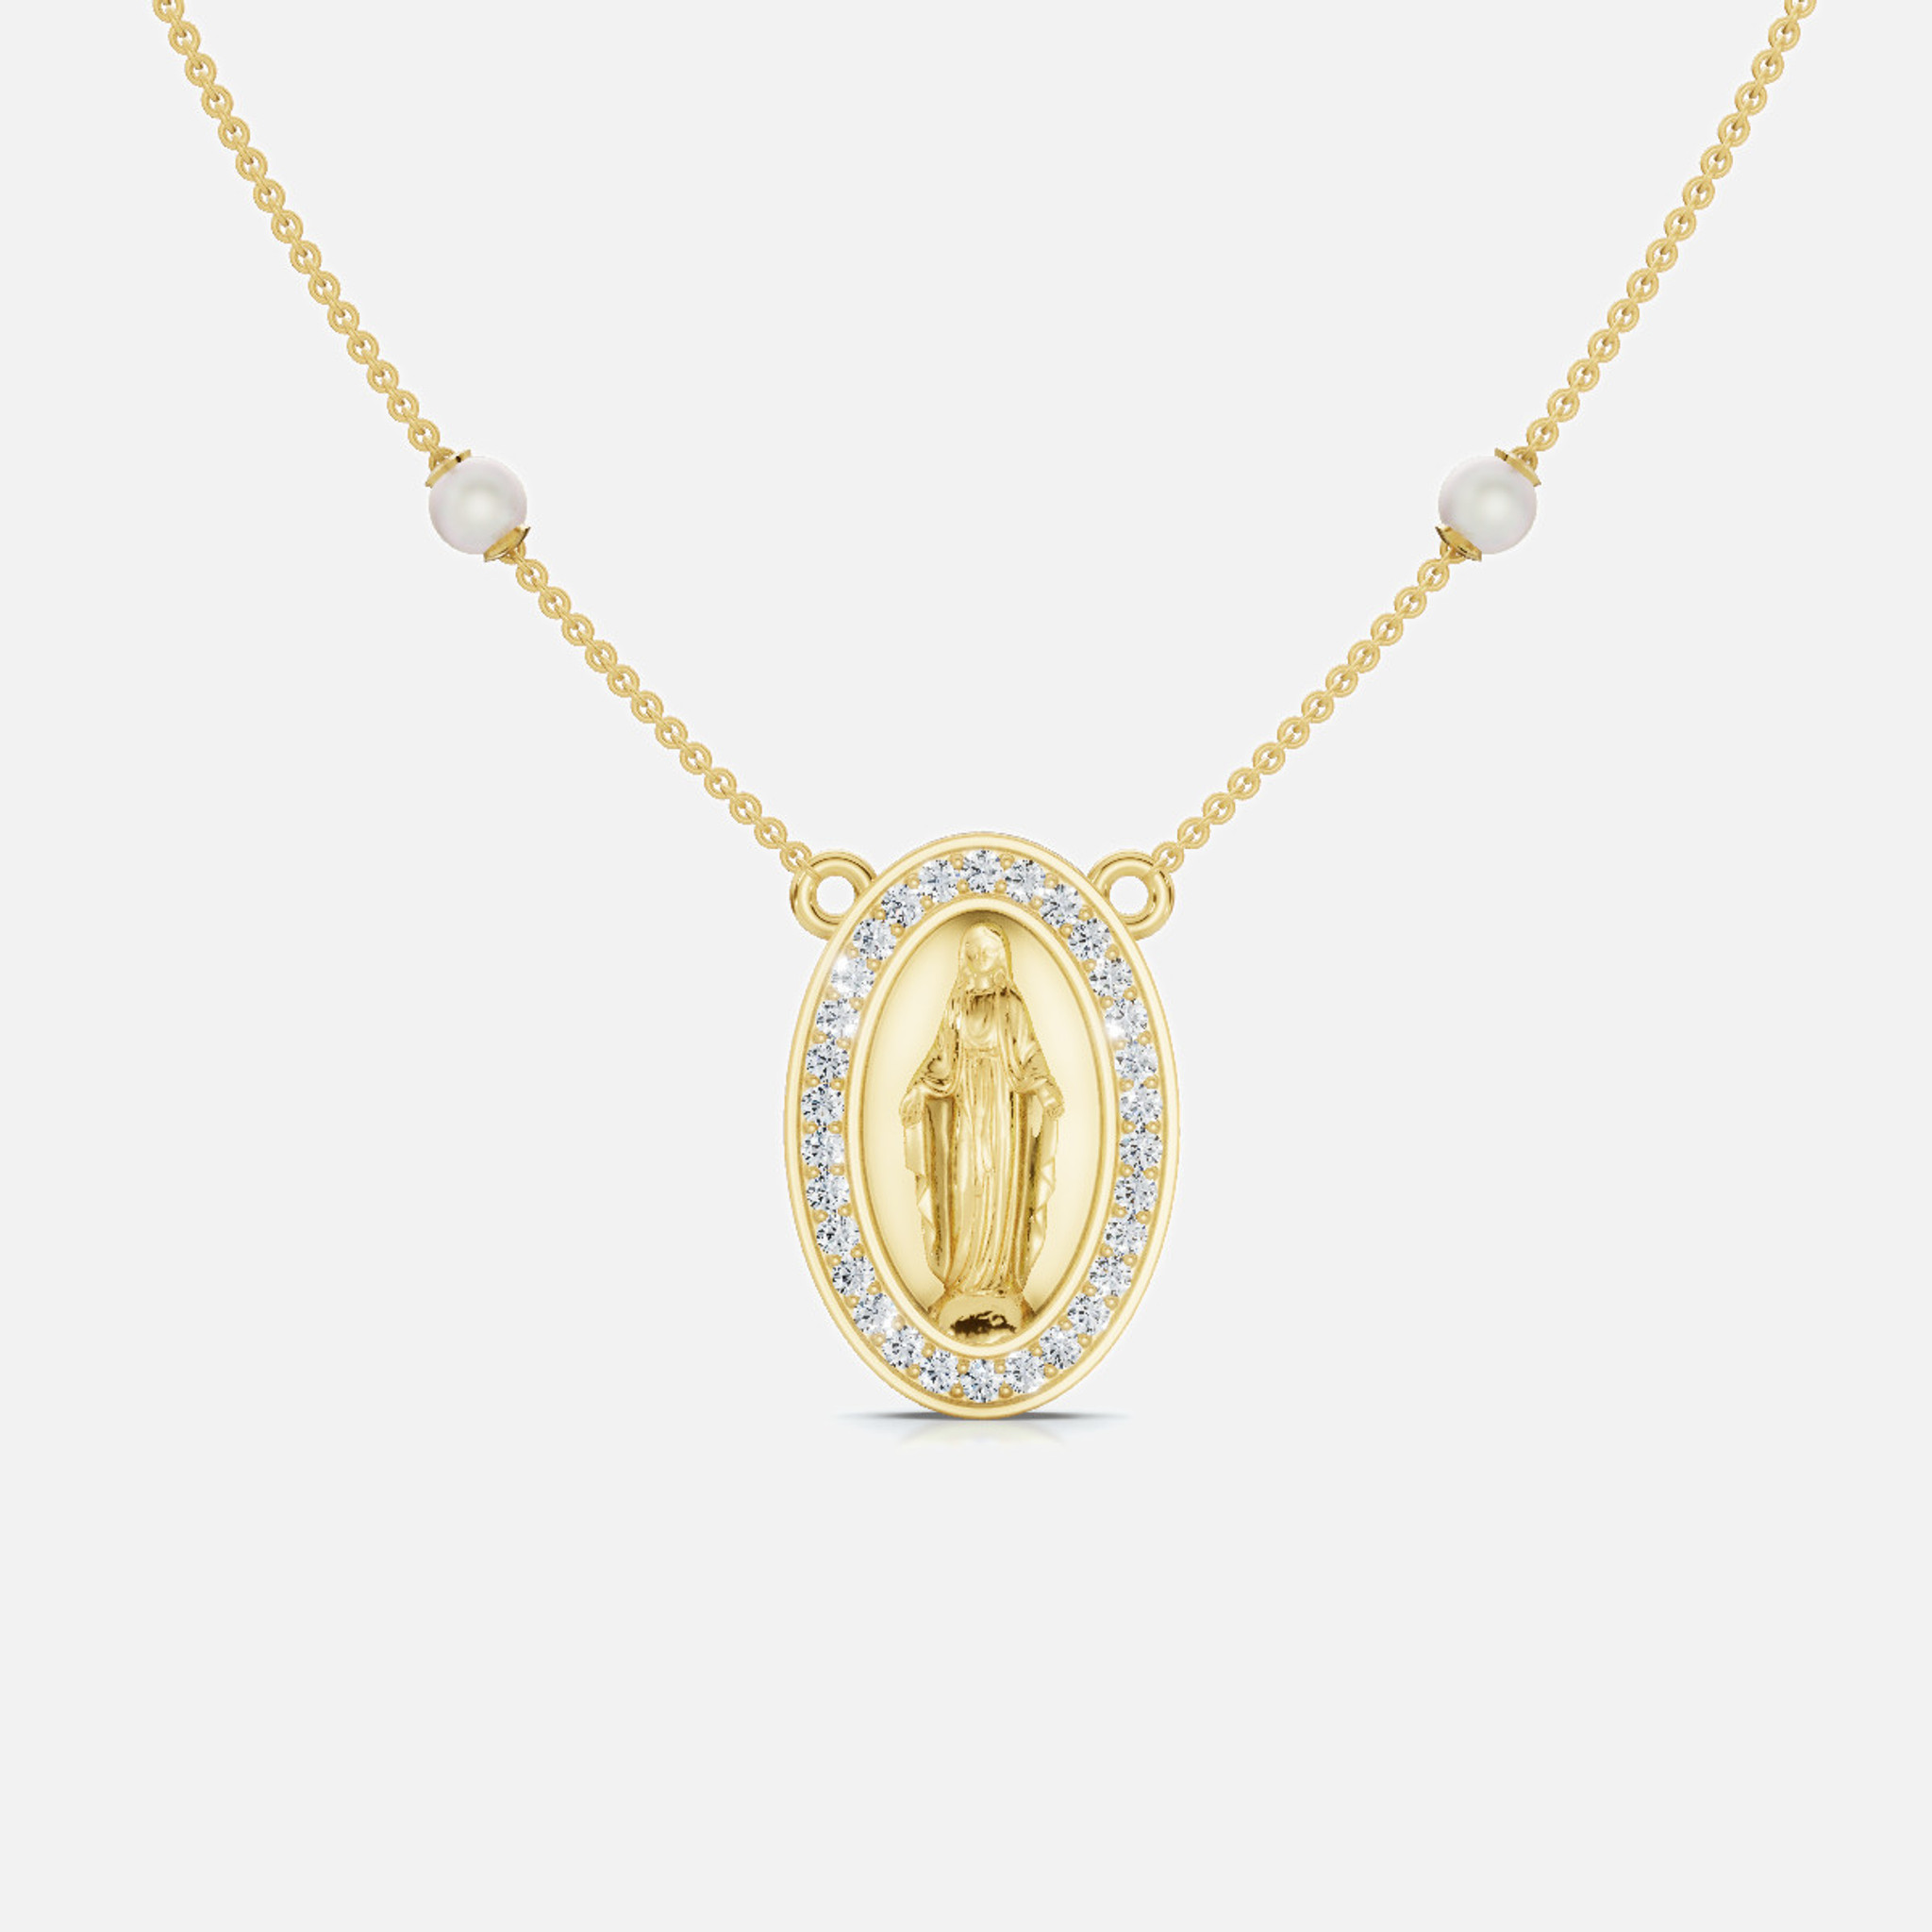 Sleek 14k Gold Virgin Mary Necklace with round pearls and a captivating pendant adorned with a halo of diamonds.